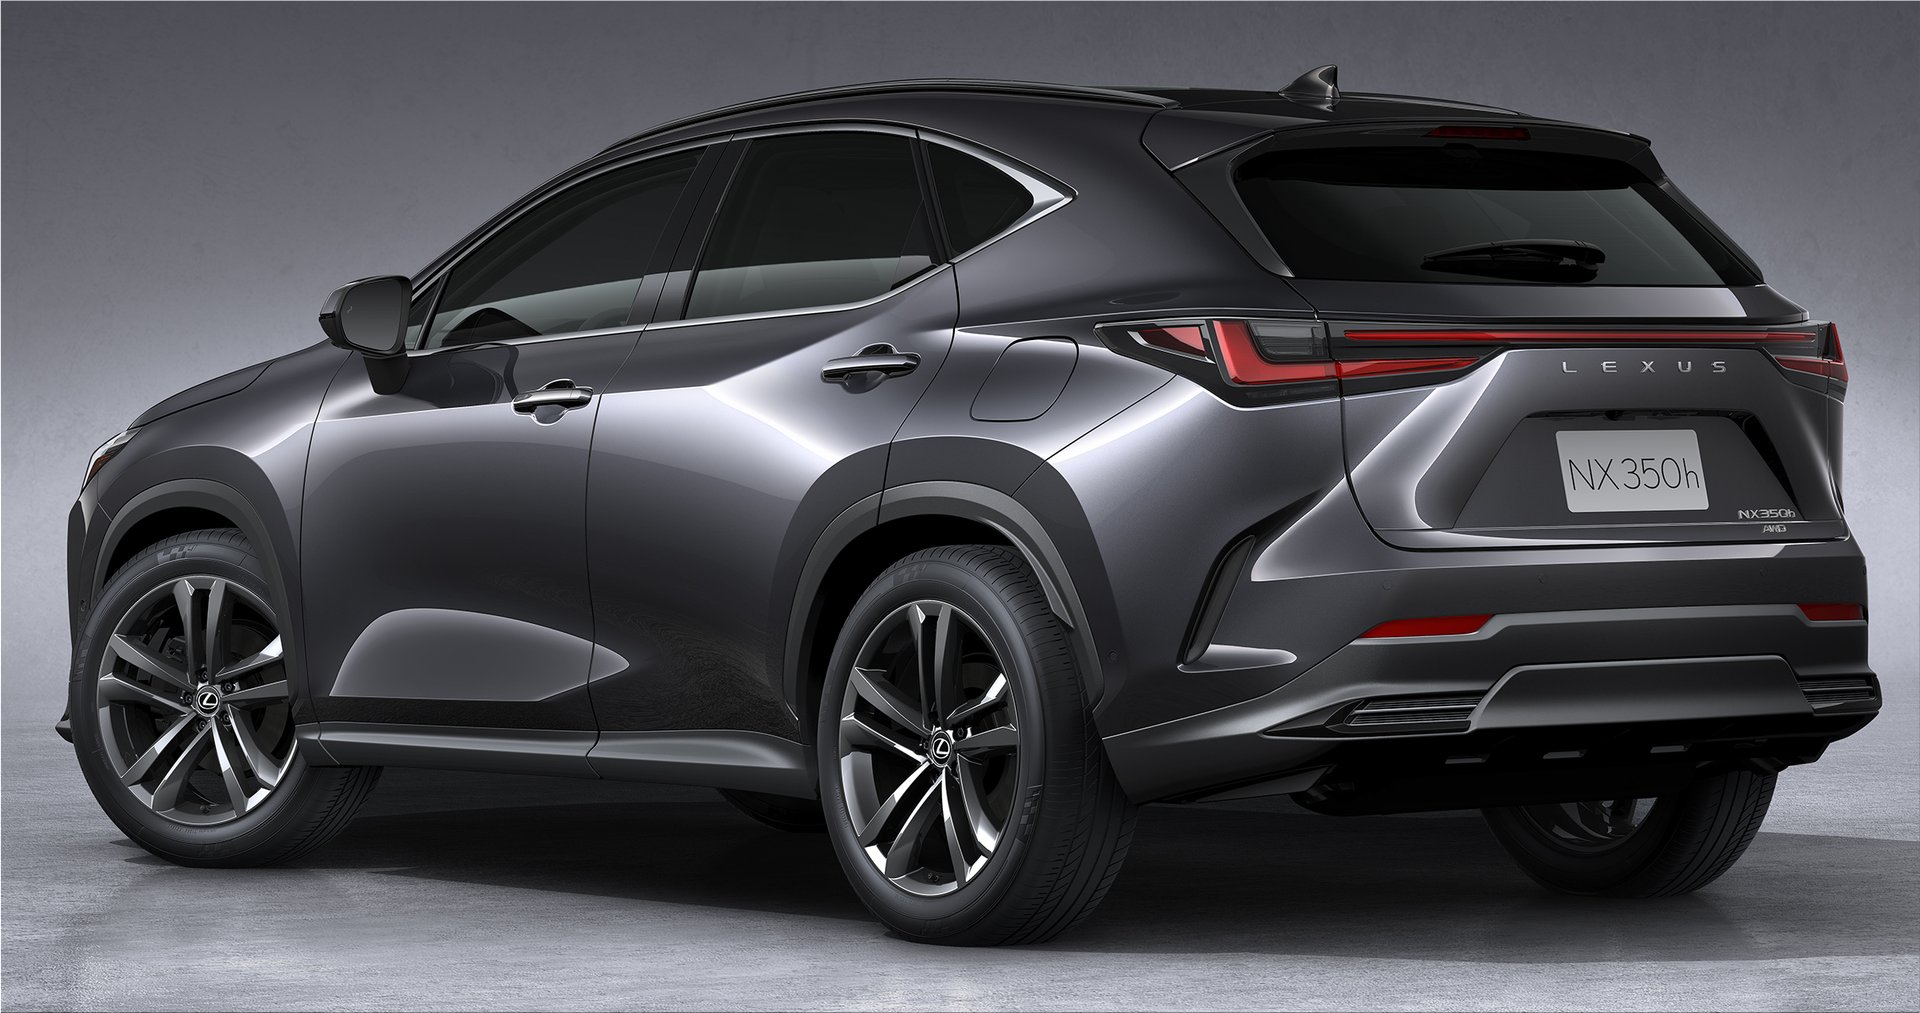 The new 2022 Lexus NX plug-in hybrid SUV with 306 hp | Spare Wheel